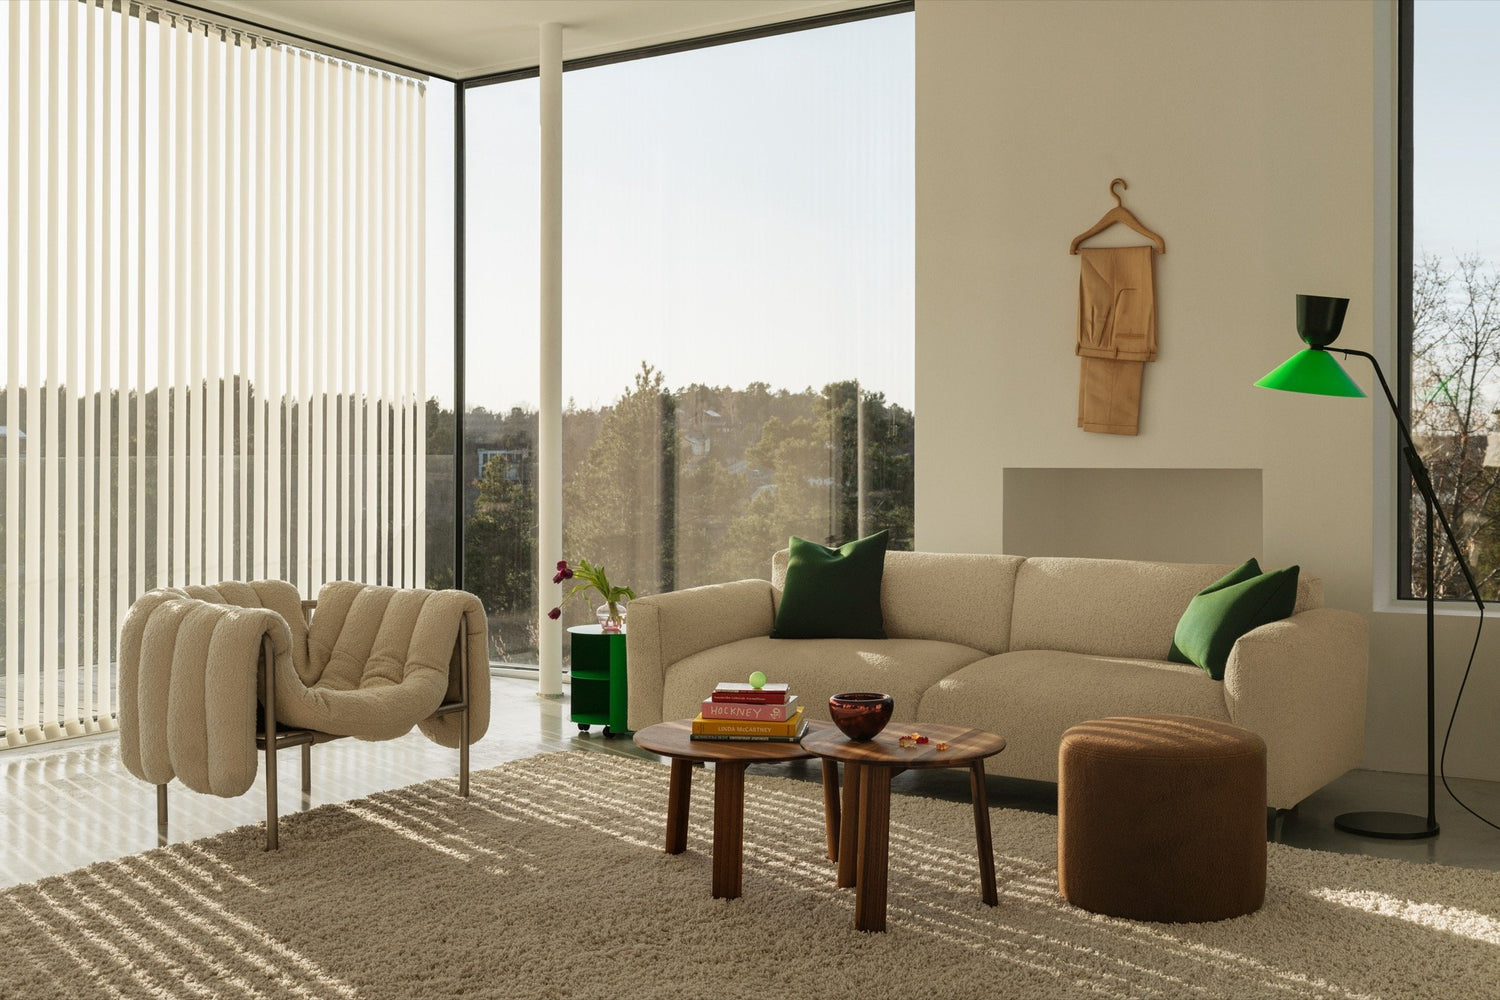 A living room scene featuring Puffy Lounge Chair in Eggshell / Stainless, Koti 3-seater sofa in Eggshell, Bon Pouf Round in Brown, Alphabeta Floor Lamp and Alle Coffee Tables set of 2 in Walnut.